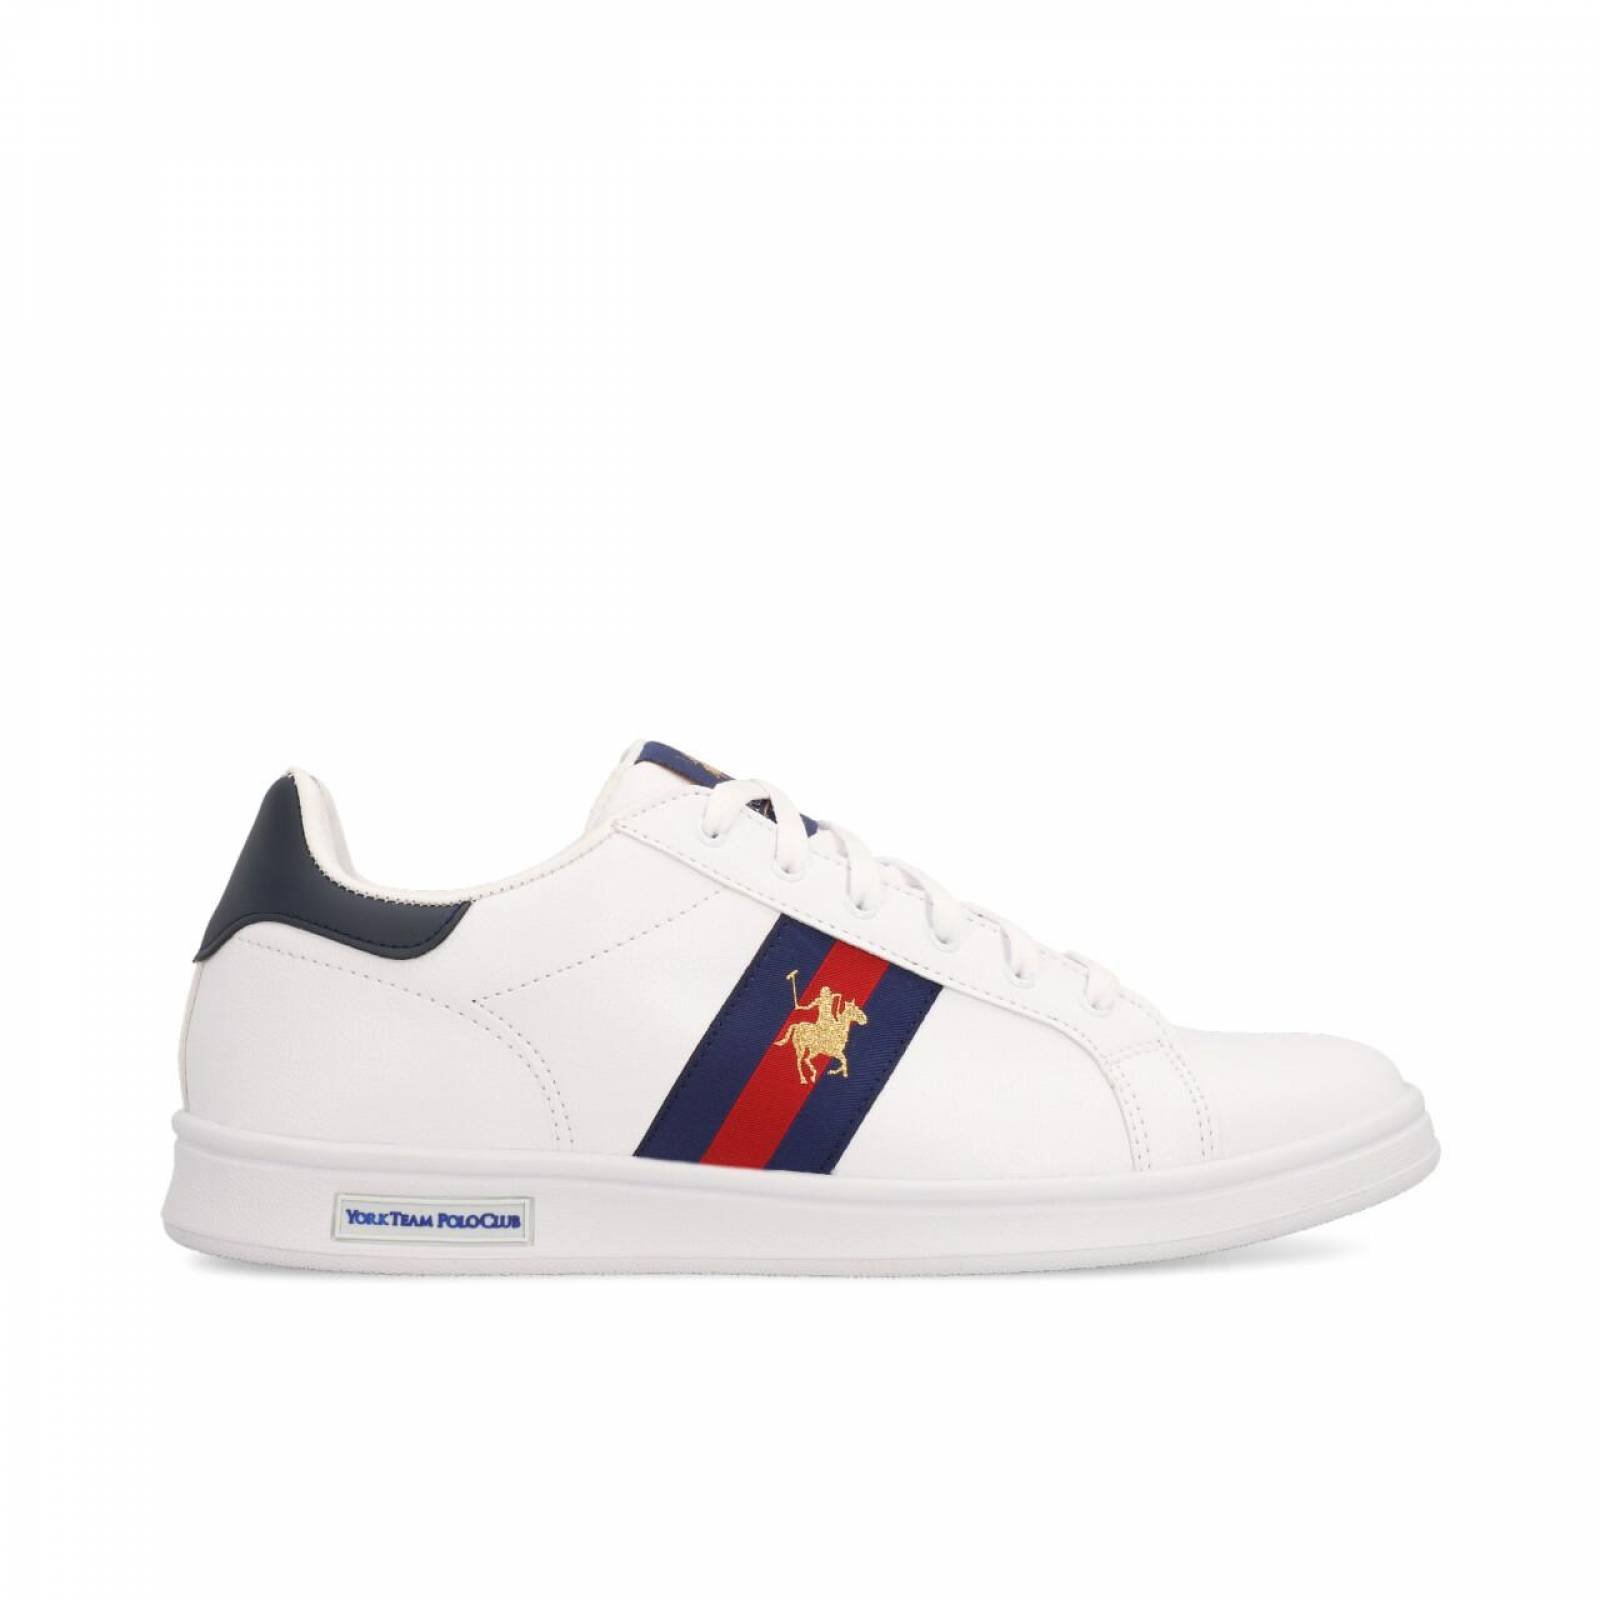 Buy Tenis Polo Club Mujer Original | UP TO 52% OFF